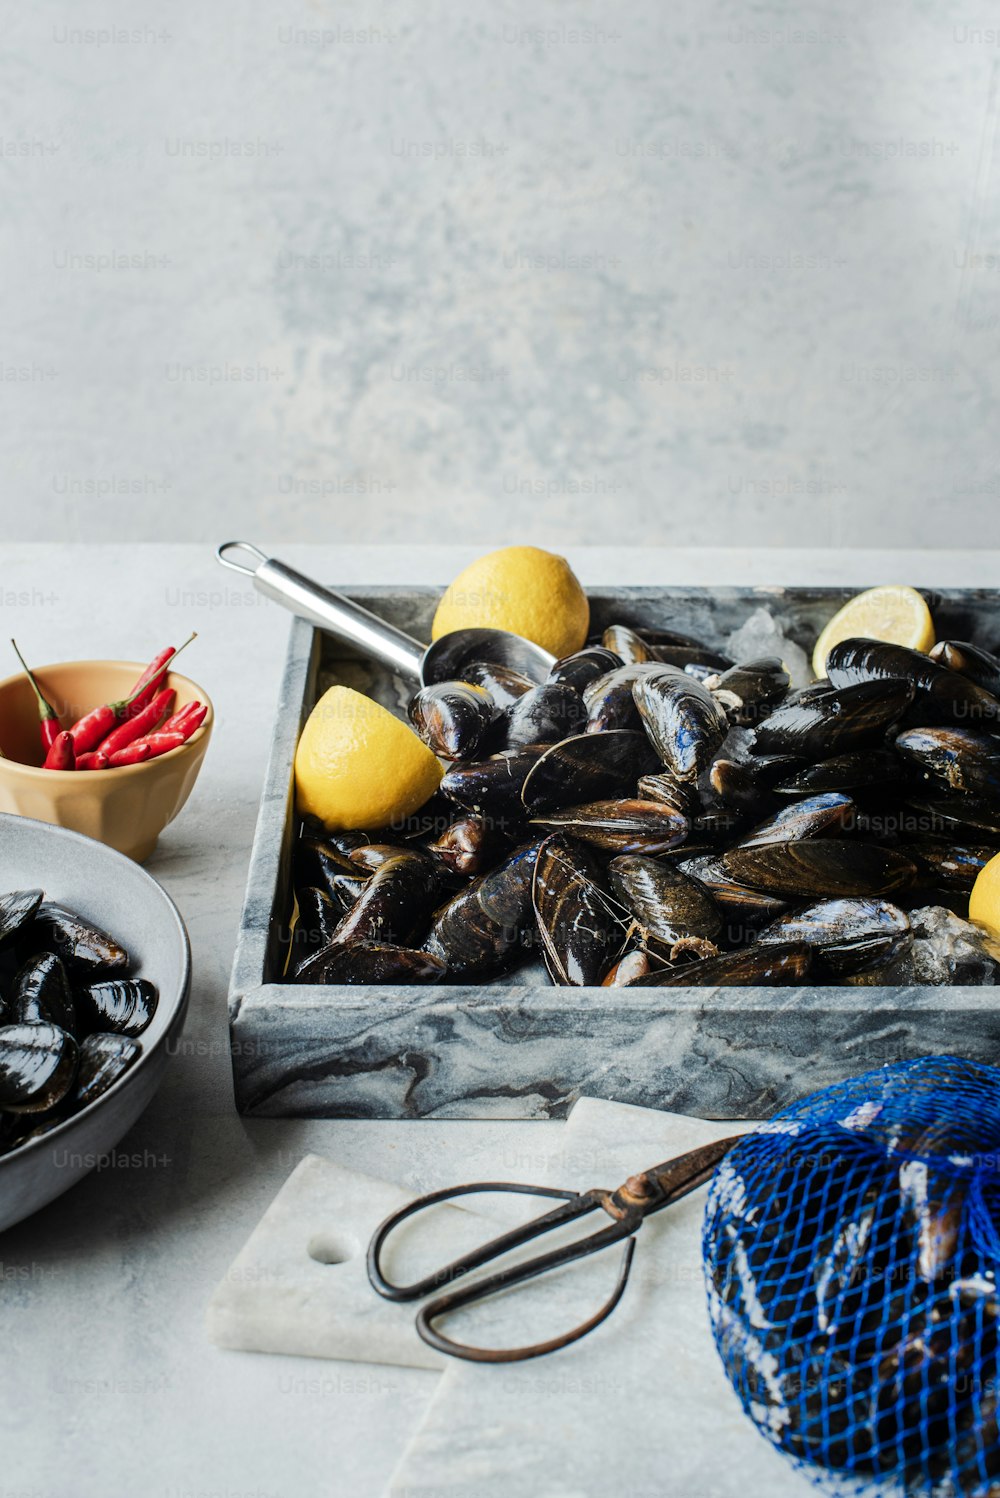 a tray of mussels with lemons and a bowl of chili